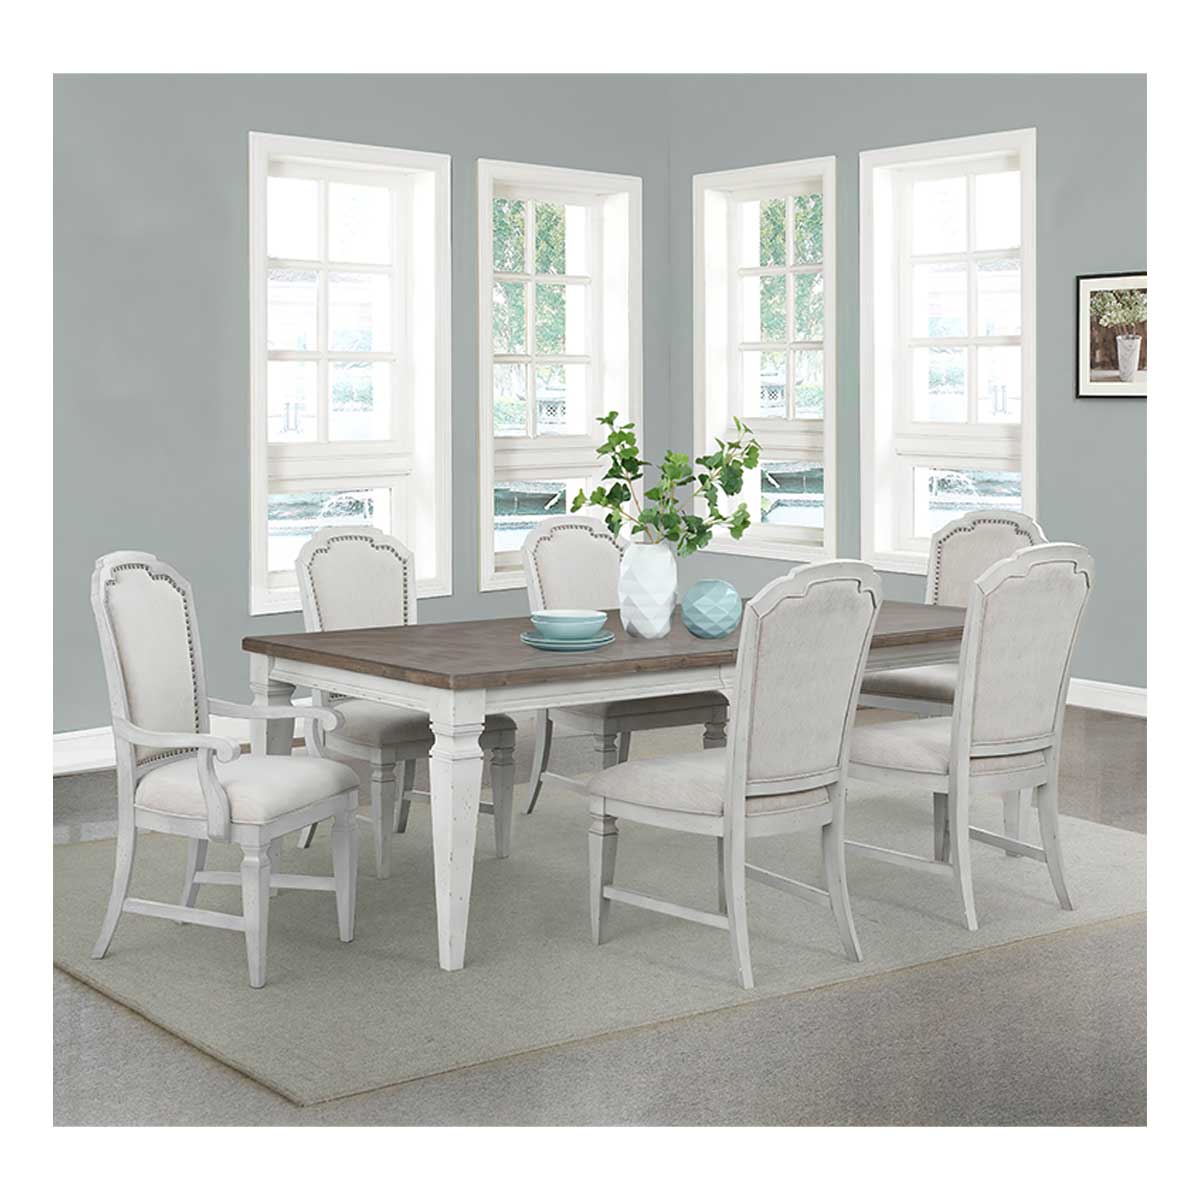 Avalon Furniture Nantucket Leg Table, 4 Side Chairs and 2 Arm Chairs